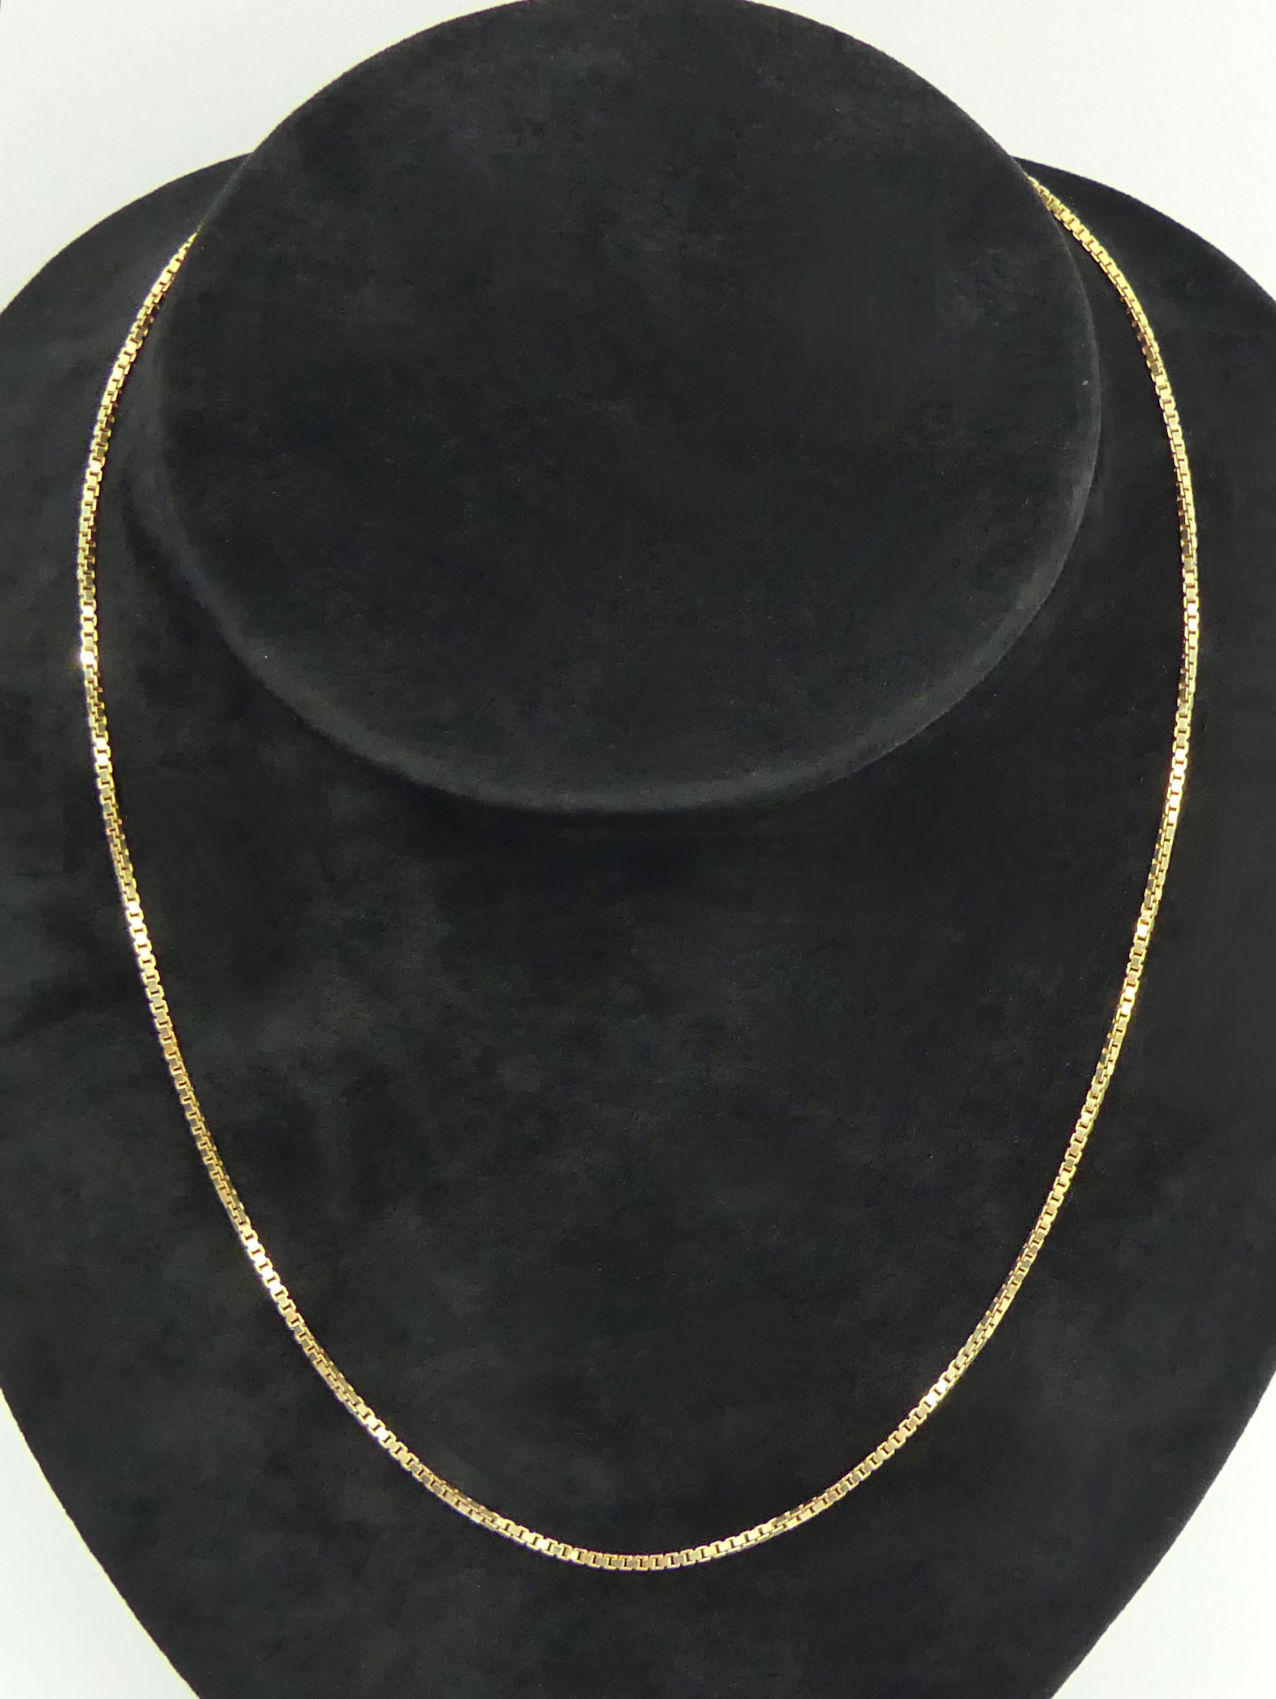 9ct gold box link chain necklace, 6 grams, 46cm, 1.4mm. UK Postage £12. - Image 3 of 3